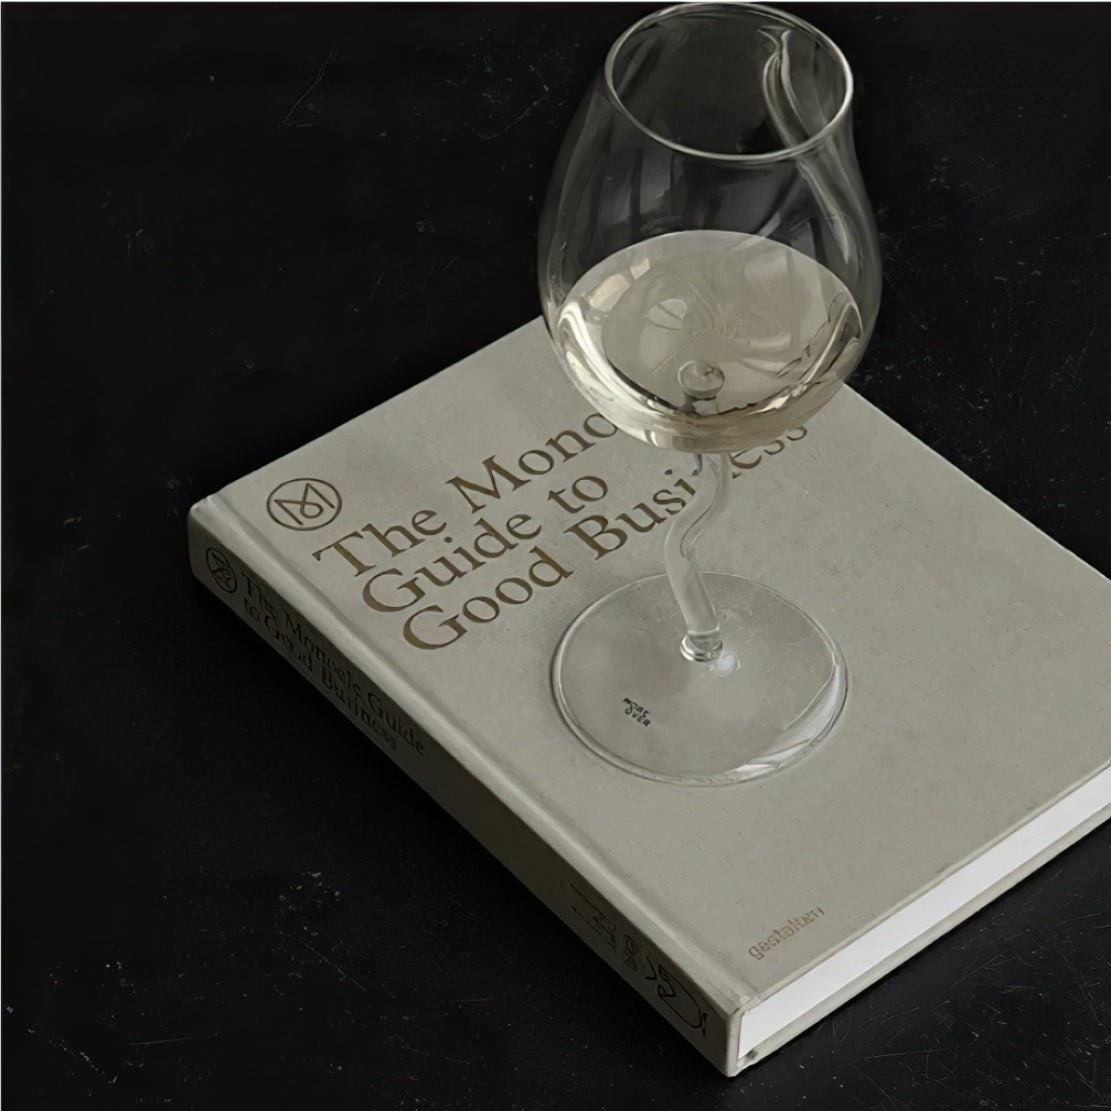 Wiggle stem glass with white wine on a book